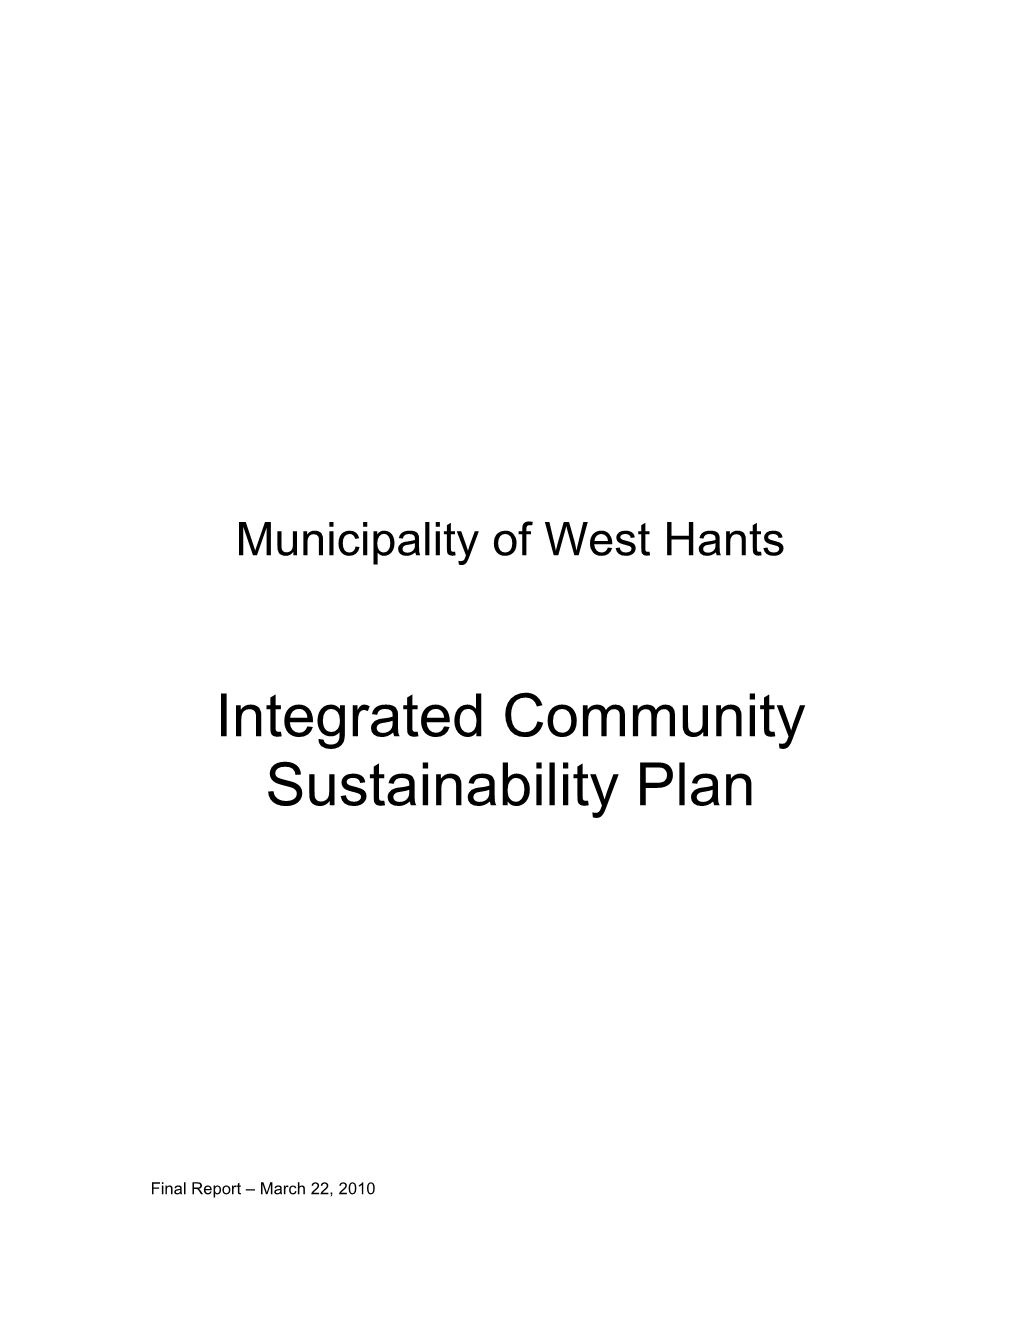 Draft ICSP for the Town of Windsor